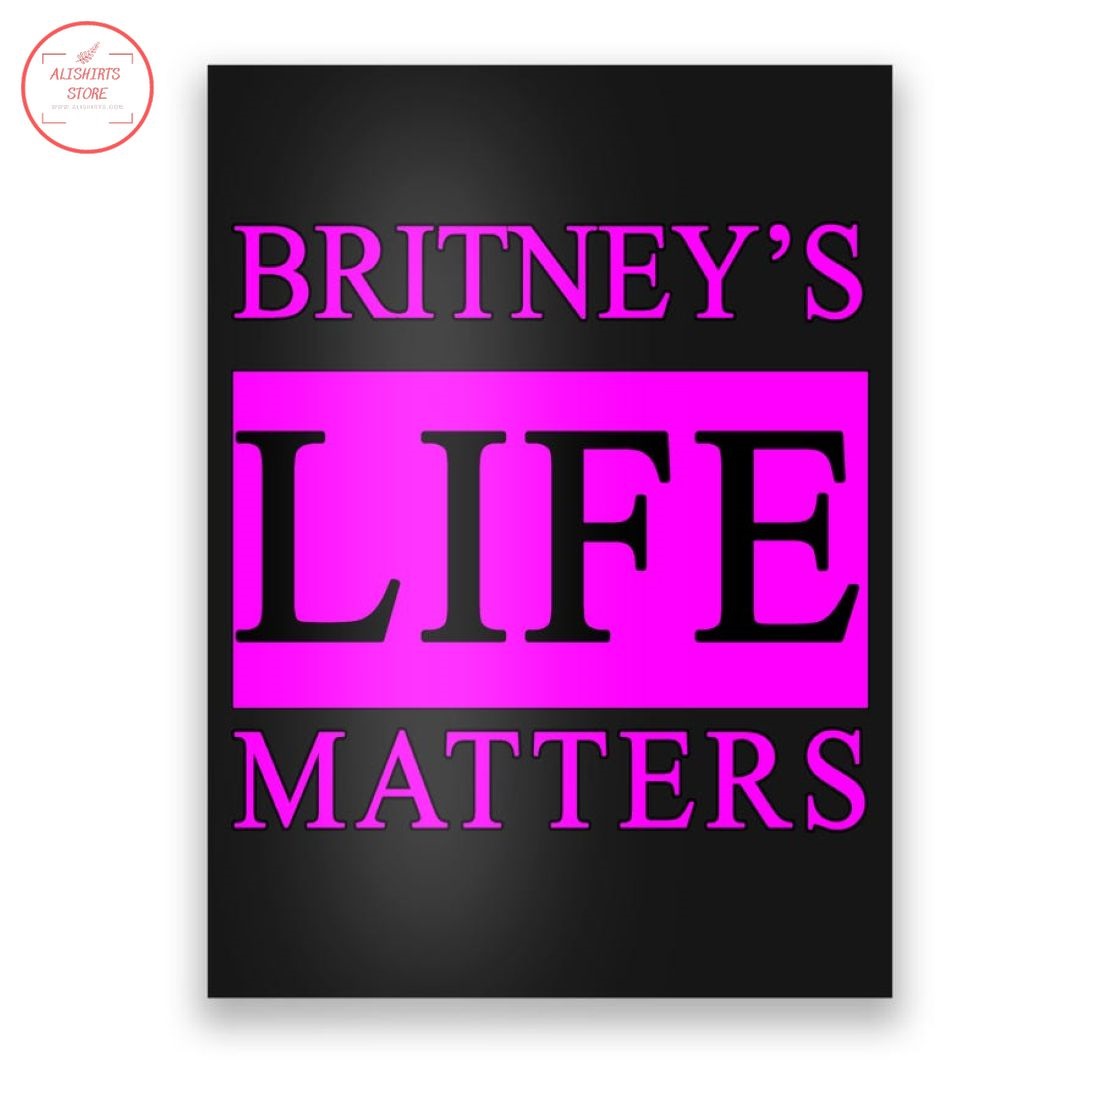 Britney's Life Matters BLM Free Britney Canvas